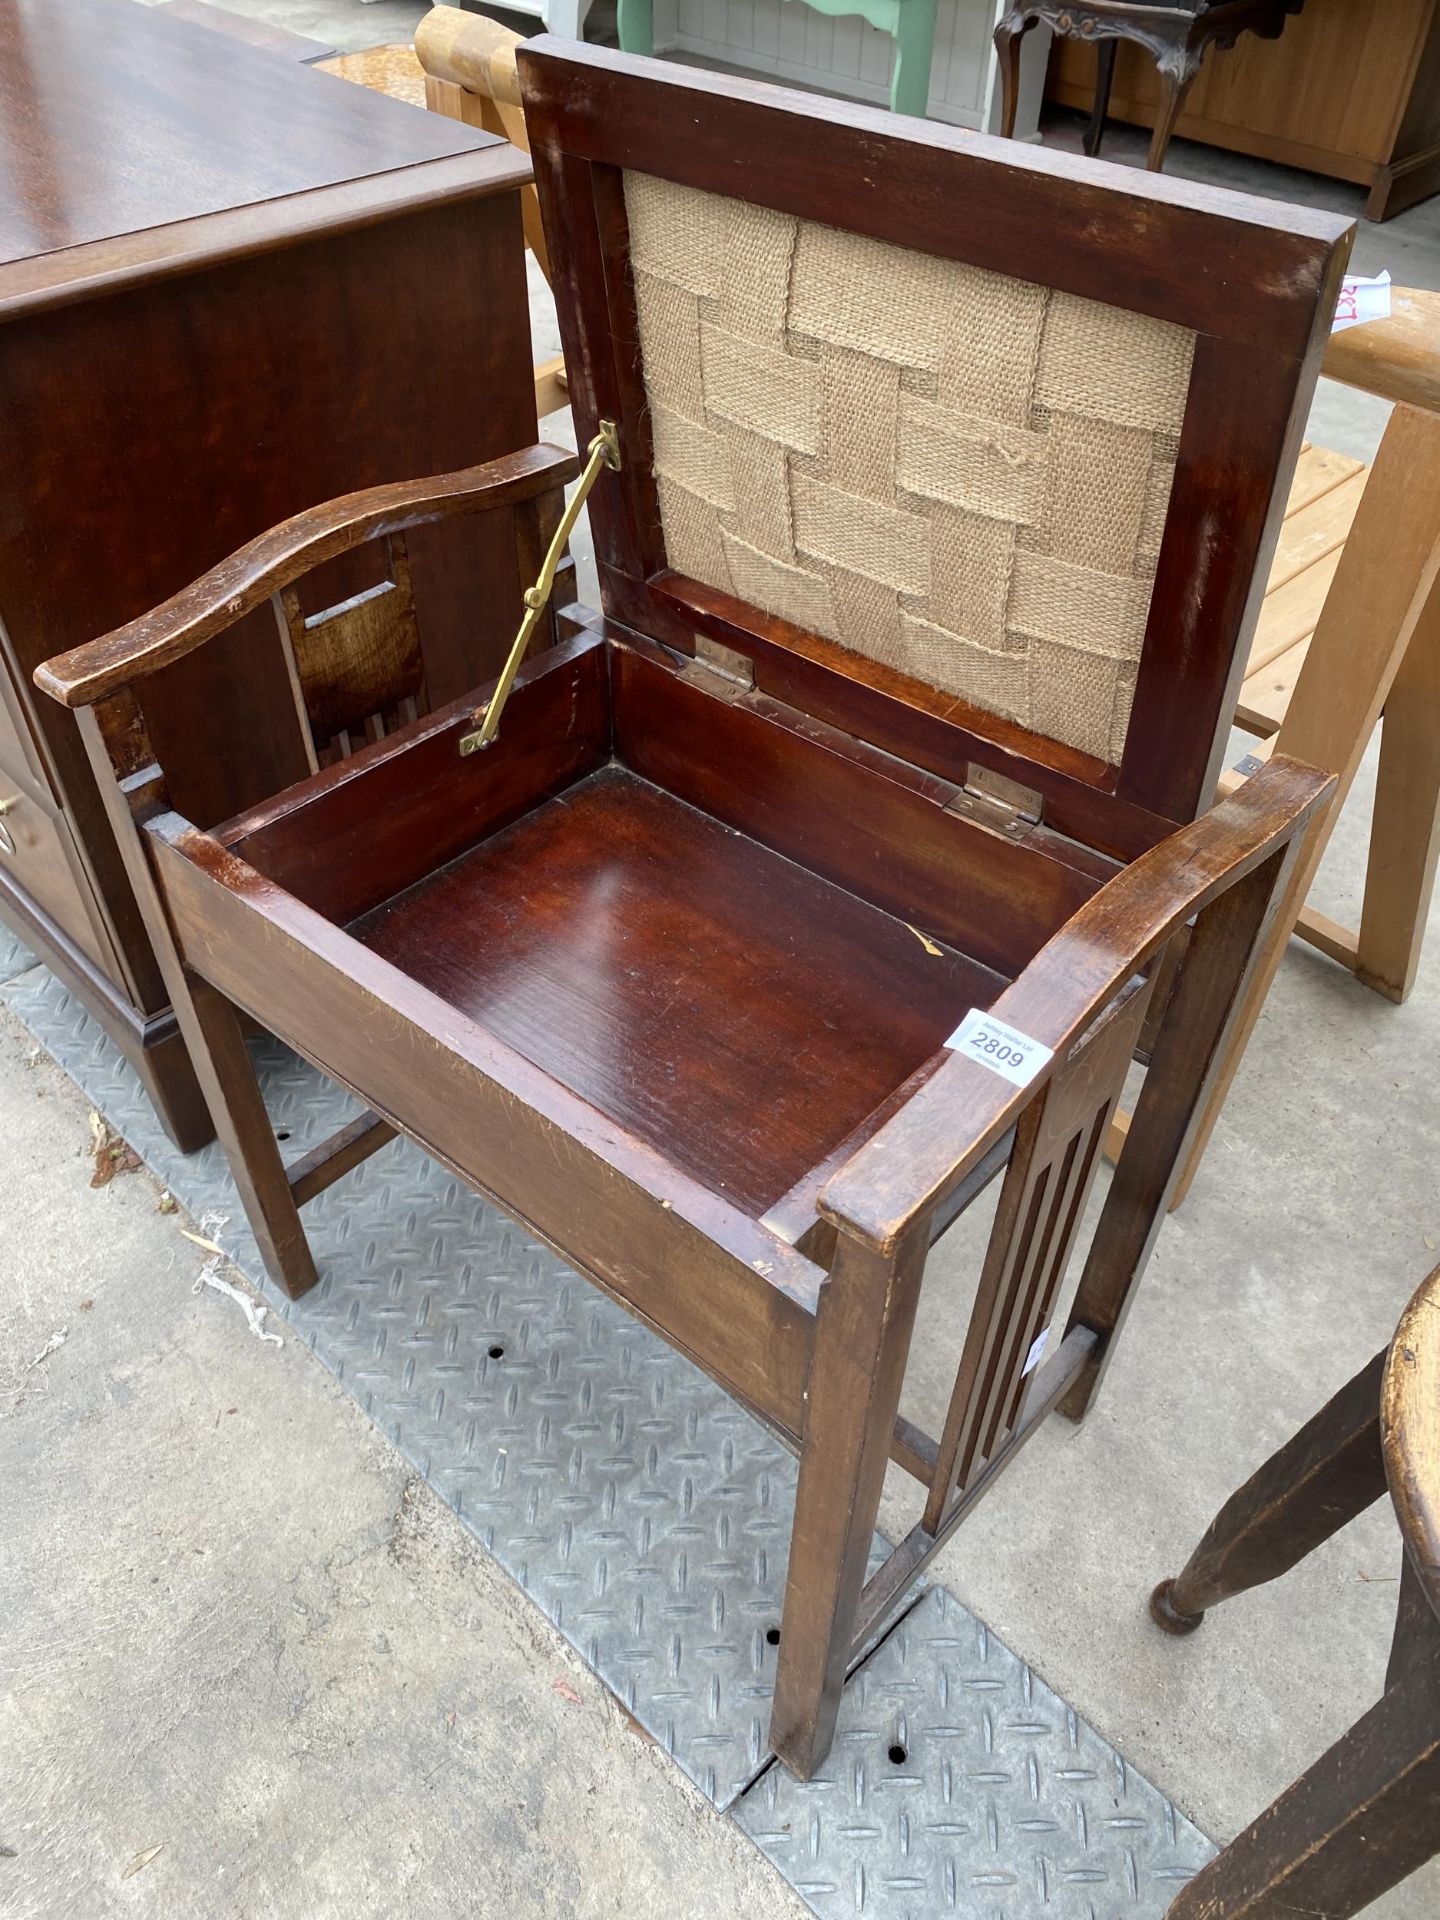 AN EDWARDIAN MAHOGANY AND INLAID PIANO STOOL WITH LIFT-UP LID - Image 3 of 3